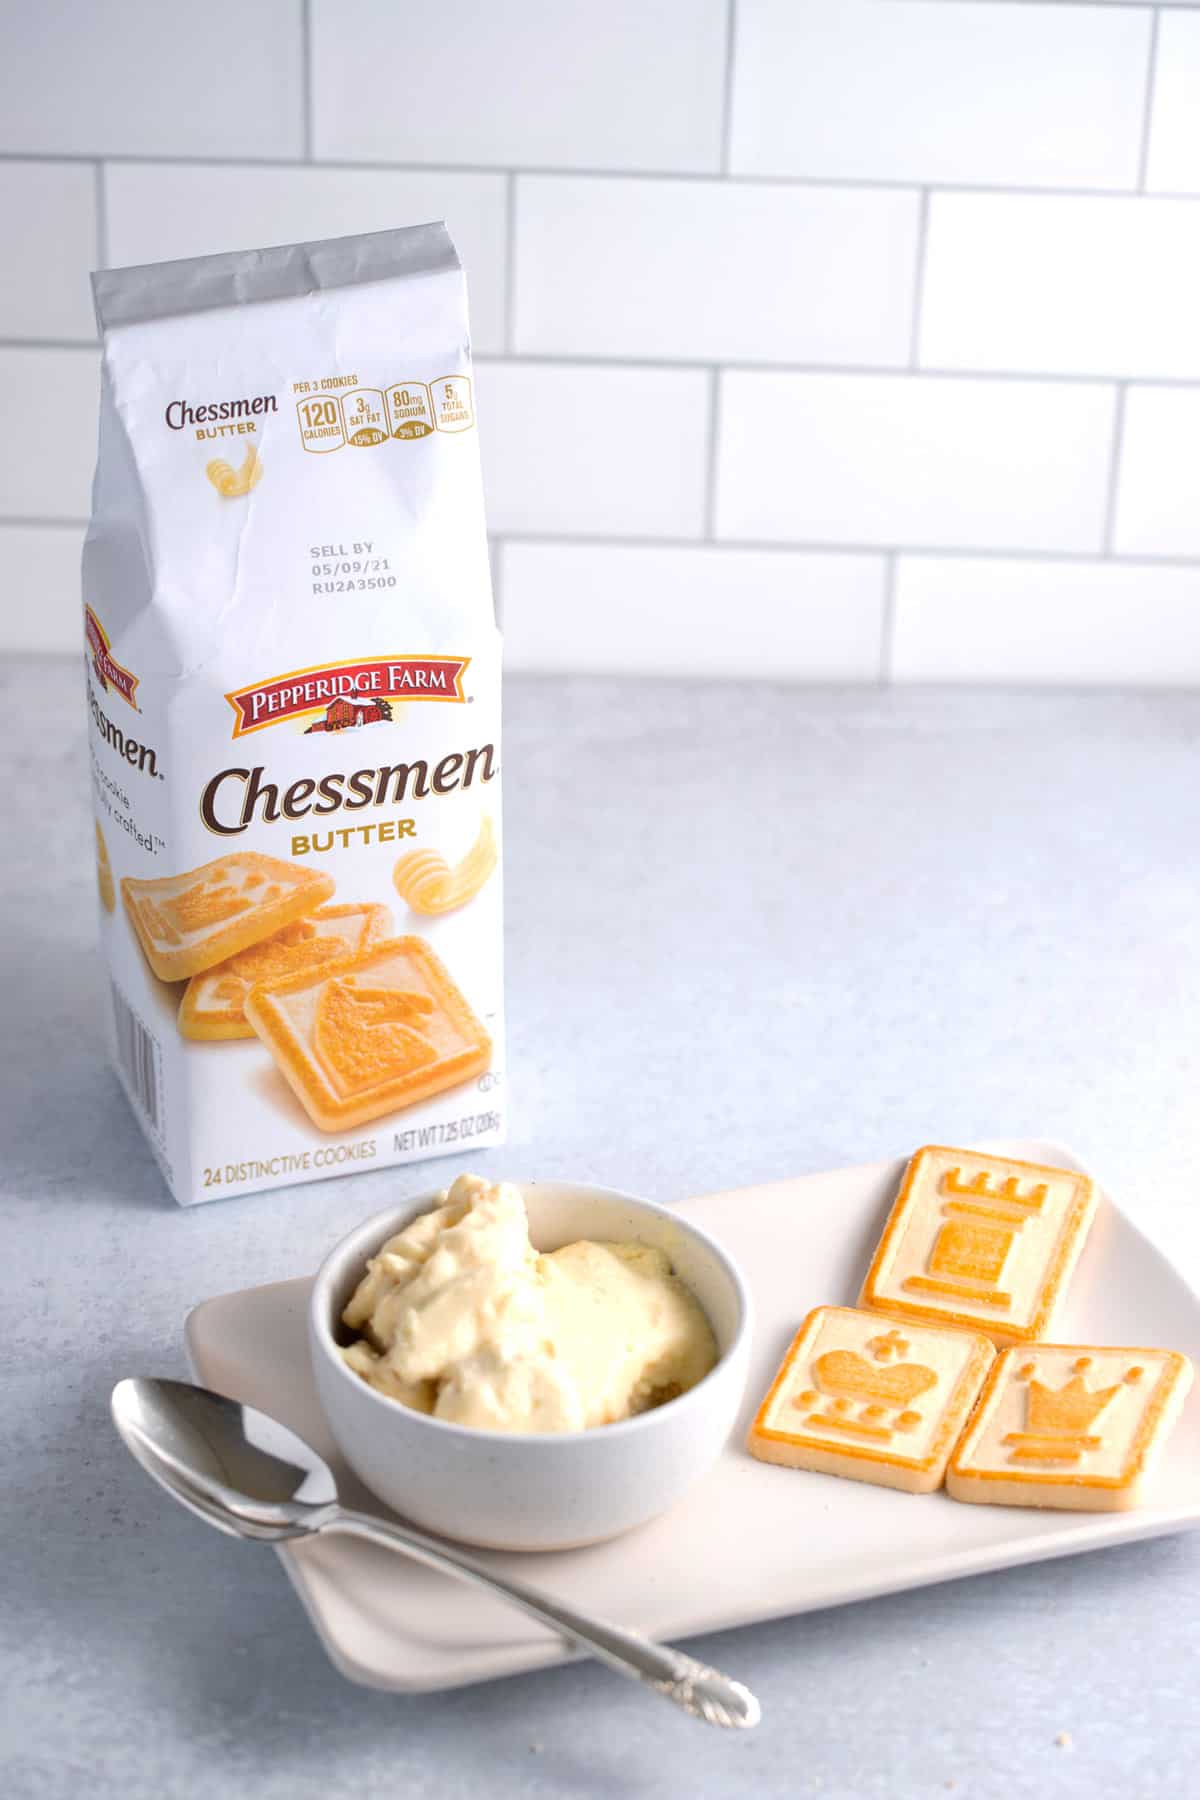 A bowl of banana pudding made with butter cookies with a package of Chessmen butter cookies in the background.